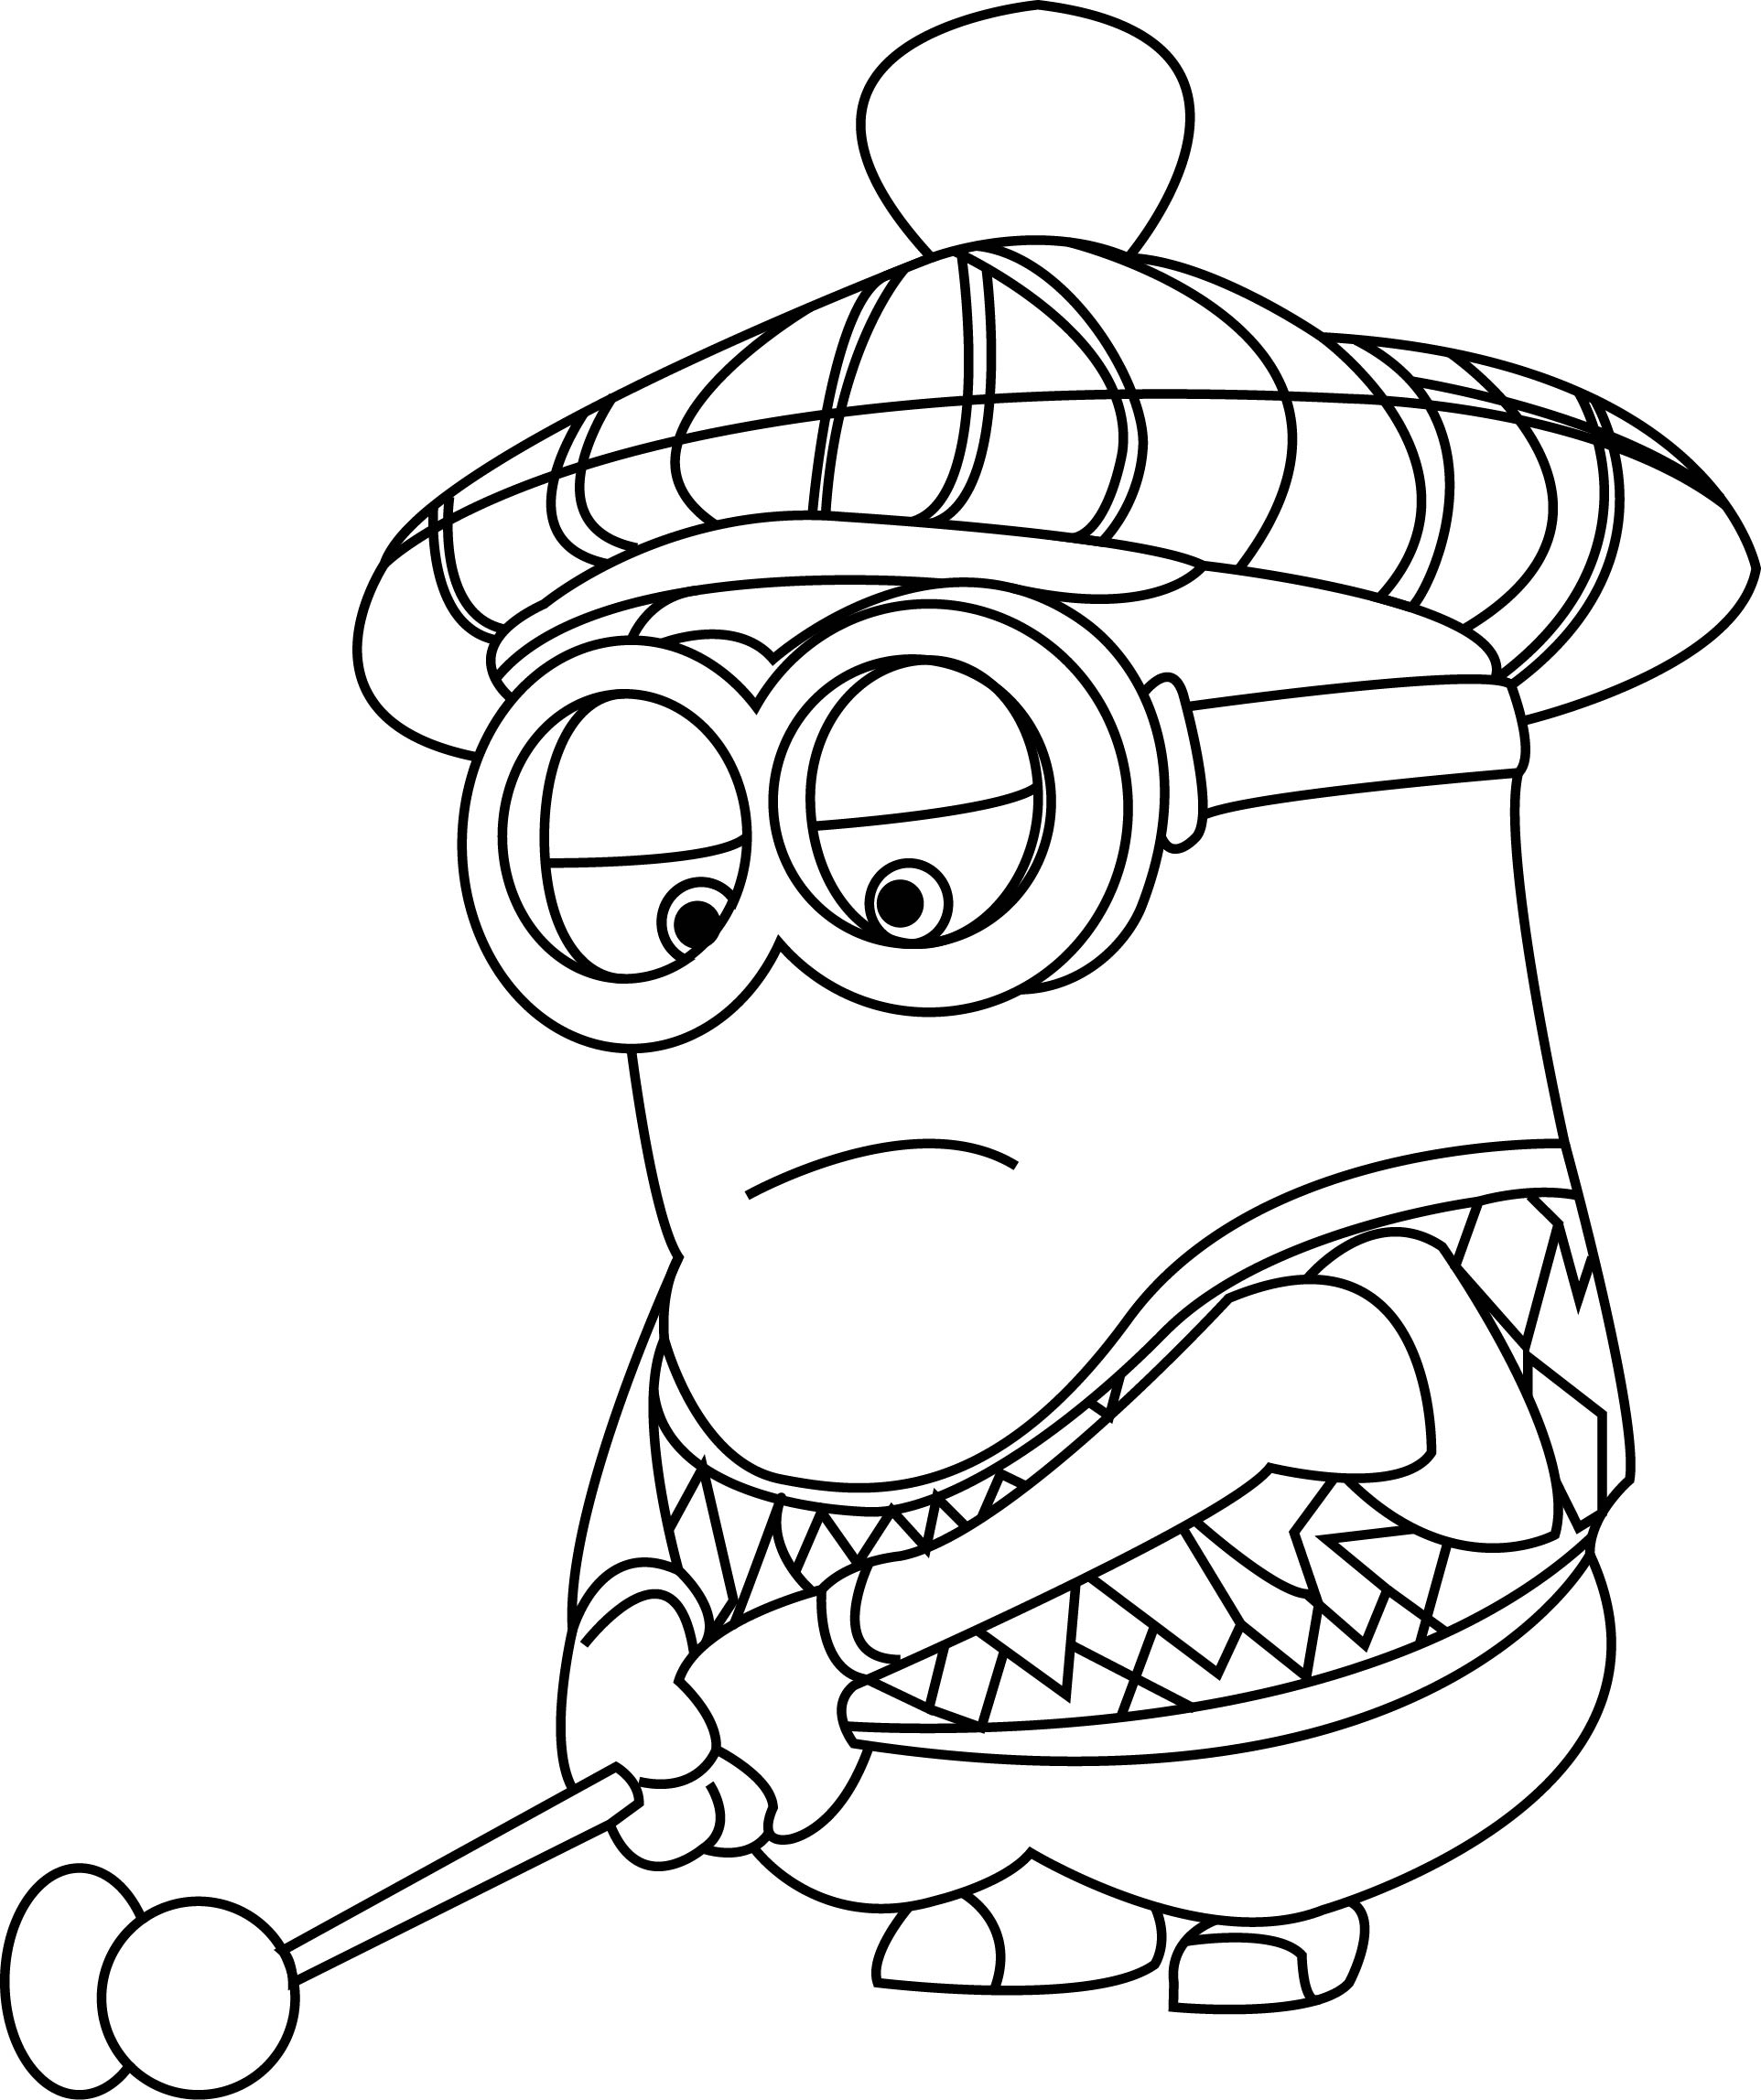 minion-kevin-playing-golf-coloring-page-free-printable-coloring-pages